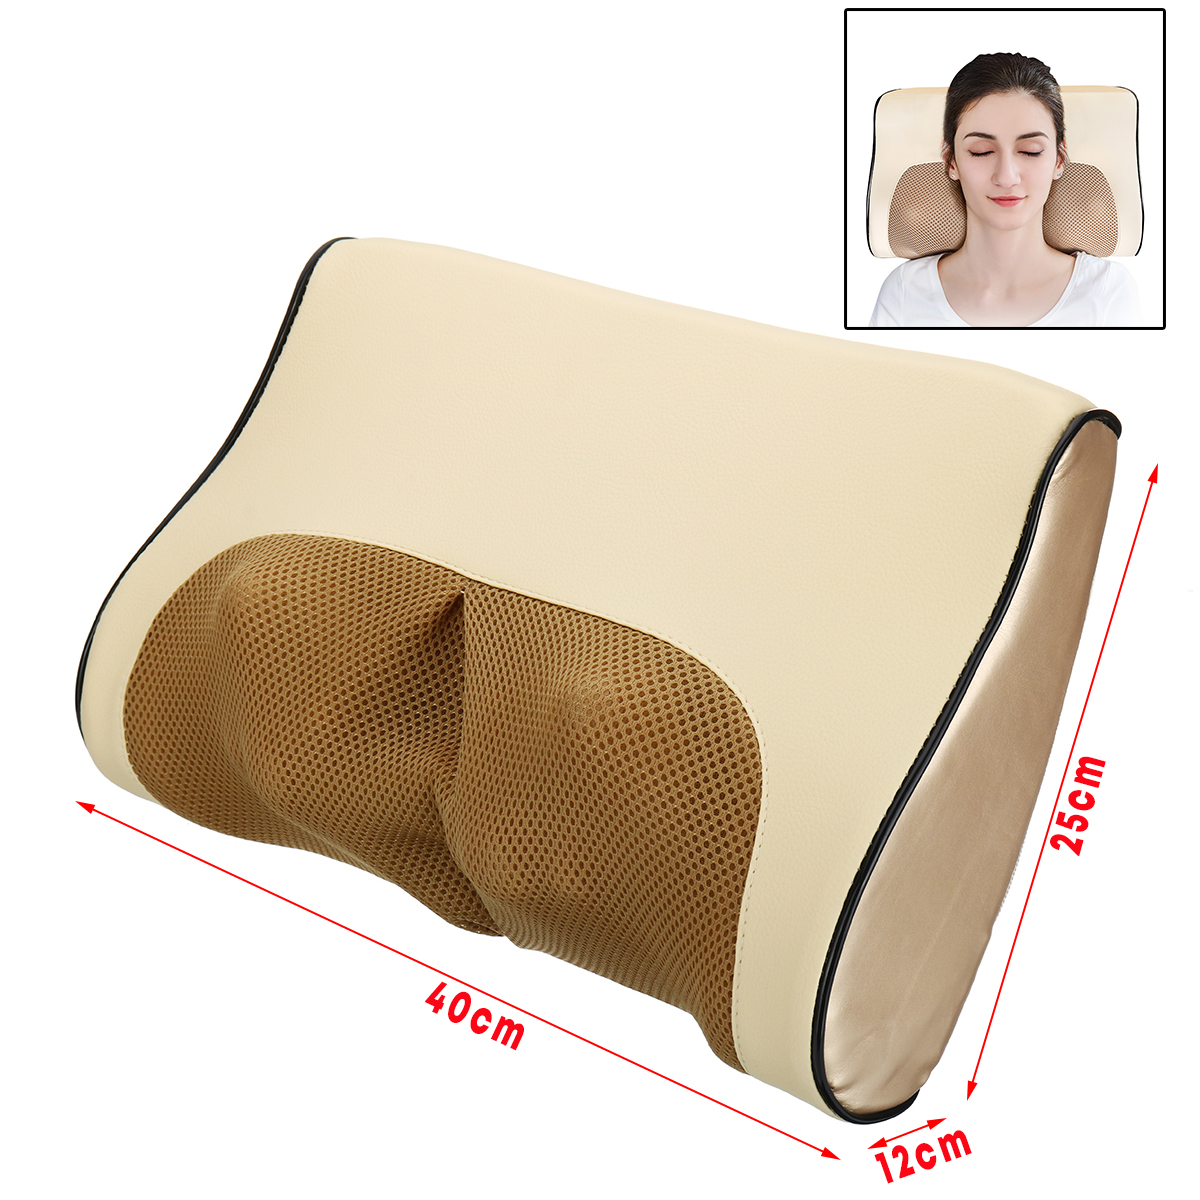 Electric-Massage-Pillow-Infrared-Heating-Neck-Shoulder-Back-Body-Massager-Device-1567188-10